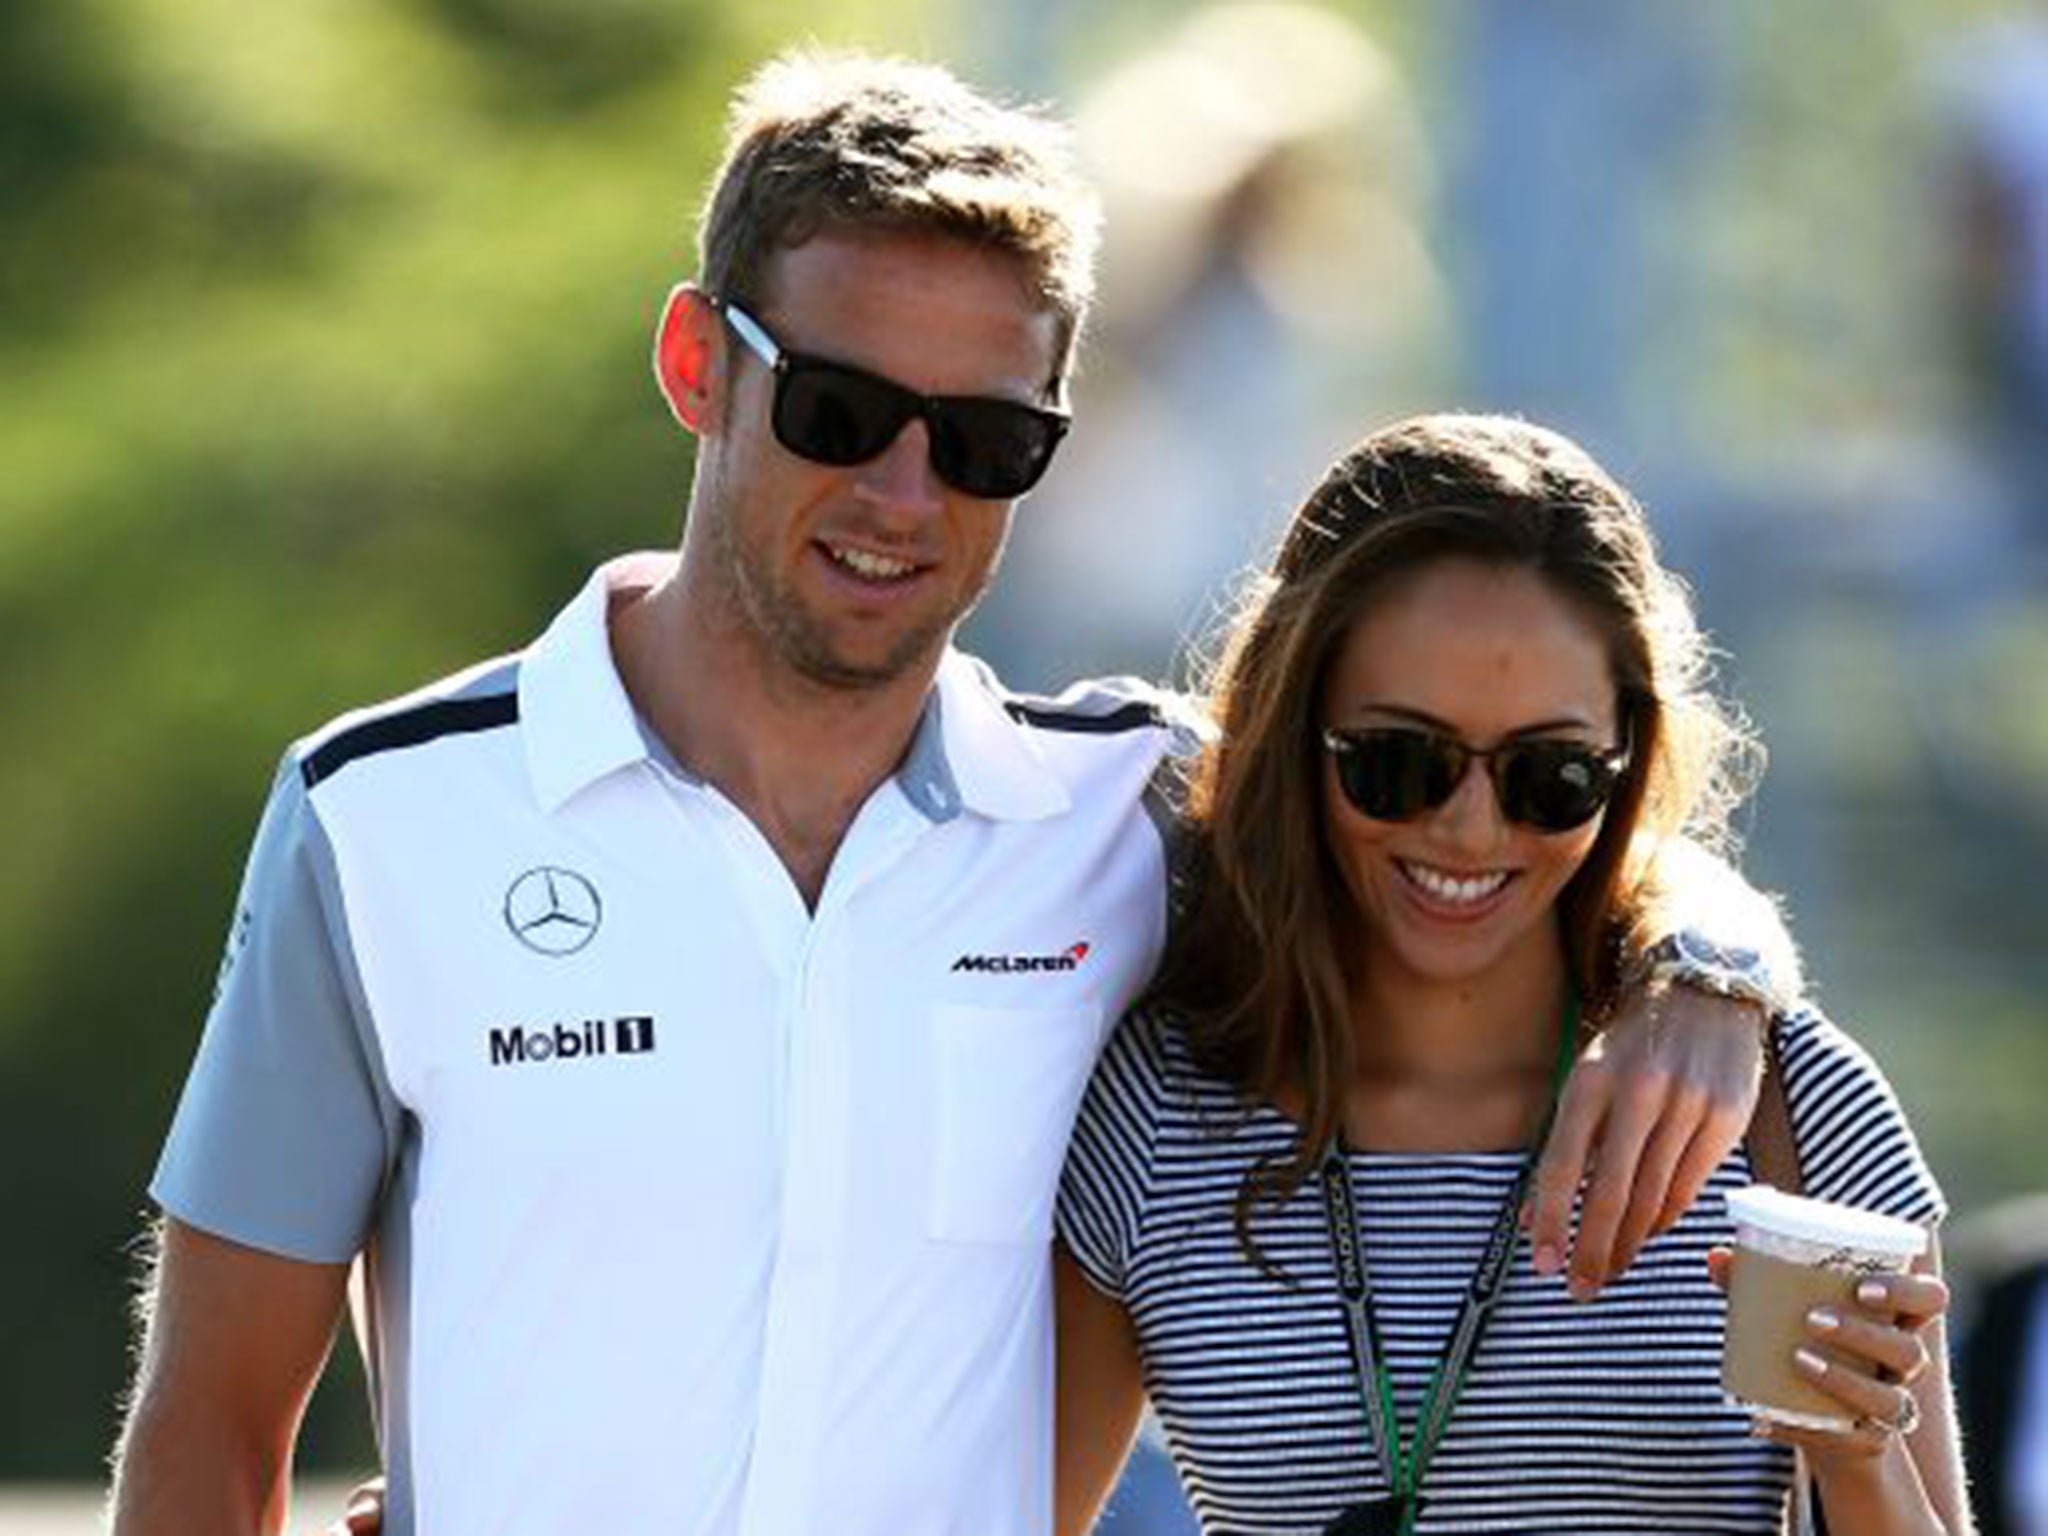 Jenson Button and girlfriend Jessica Michibata arrive at the final practice ahead of the Canadian Formula One Grand Prix